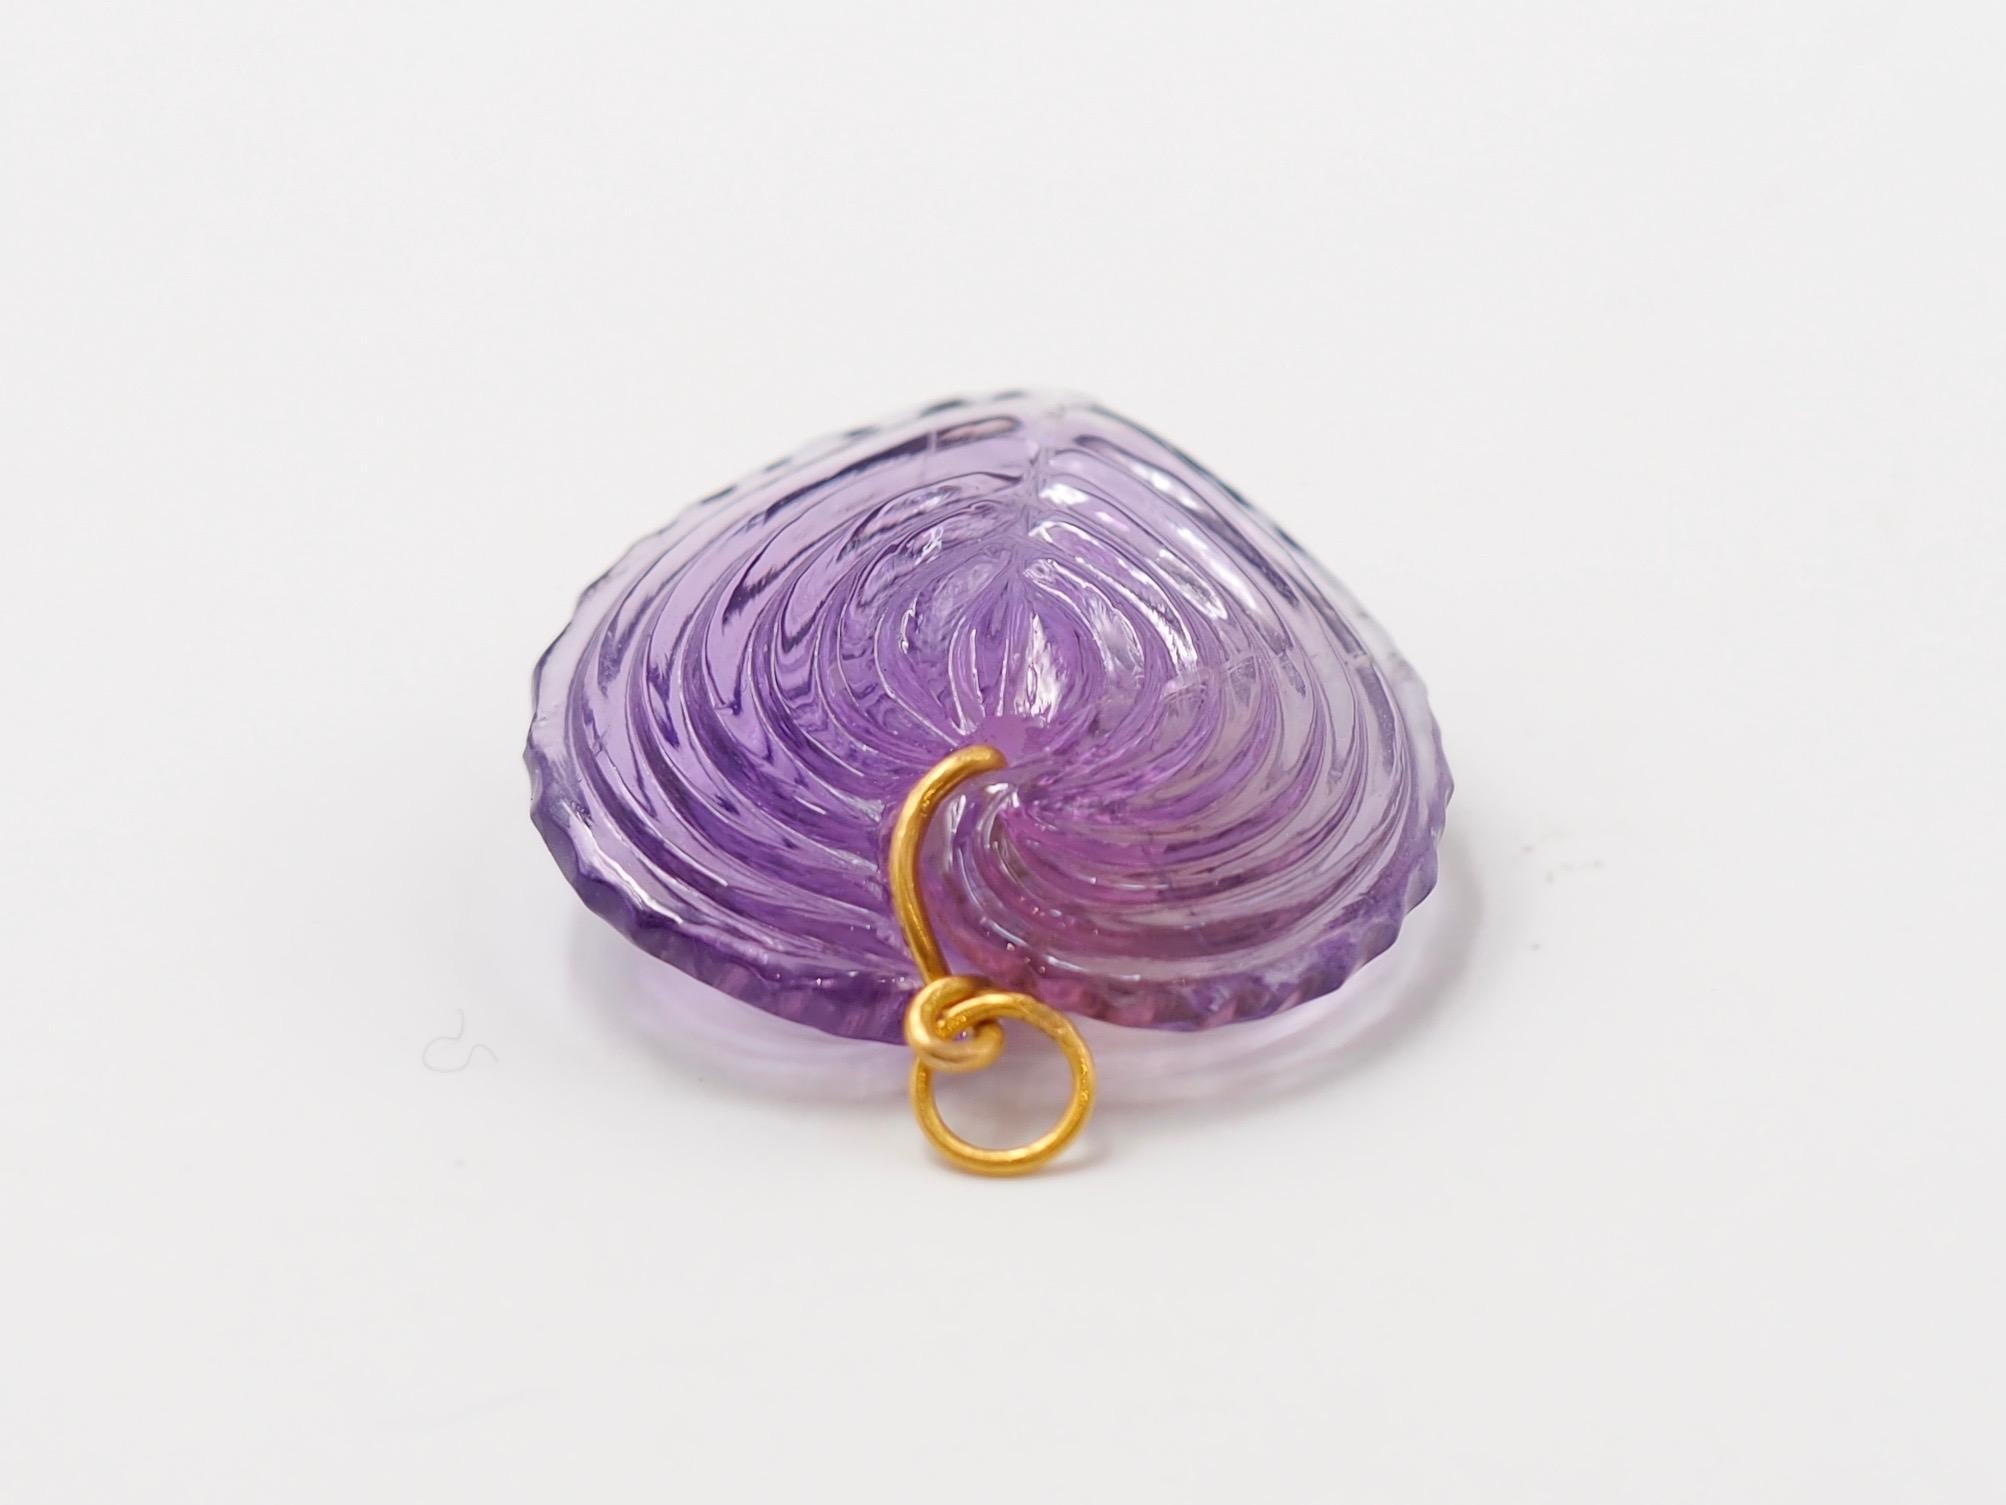 Hand-carved and handmade, this pendant represents a heart seashell in amethyst. The stone is simply drilled to allow a curved 22 karat gold wire that is twisted and finishes with a ring. 

2 sizes exist as you can see on one of the photo. This